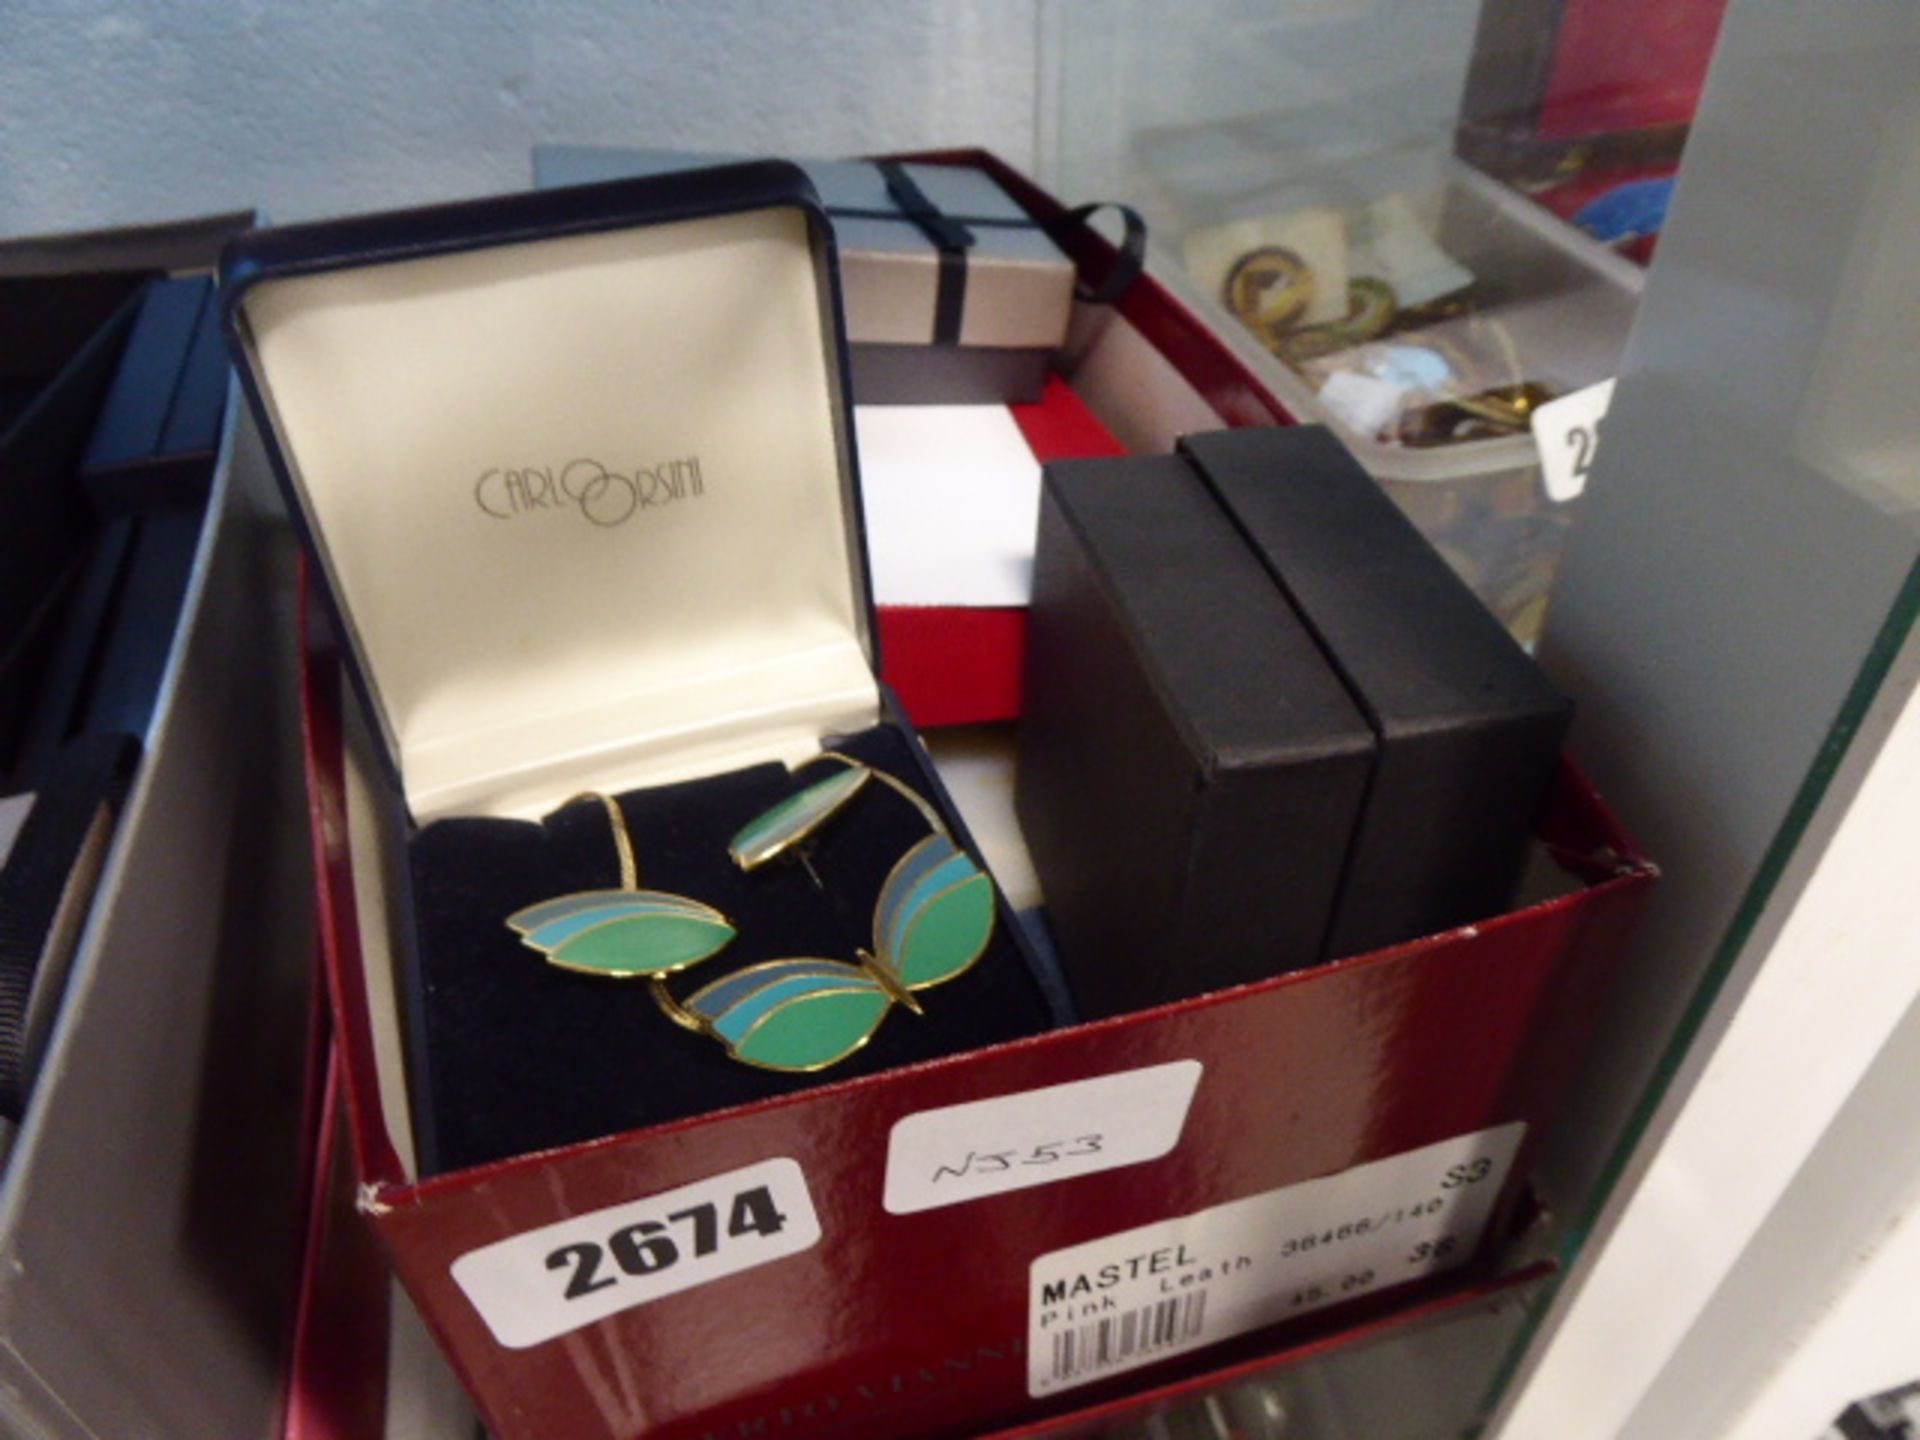 Box containing costume jewellery earring and necklace sets